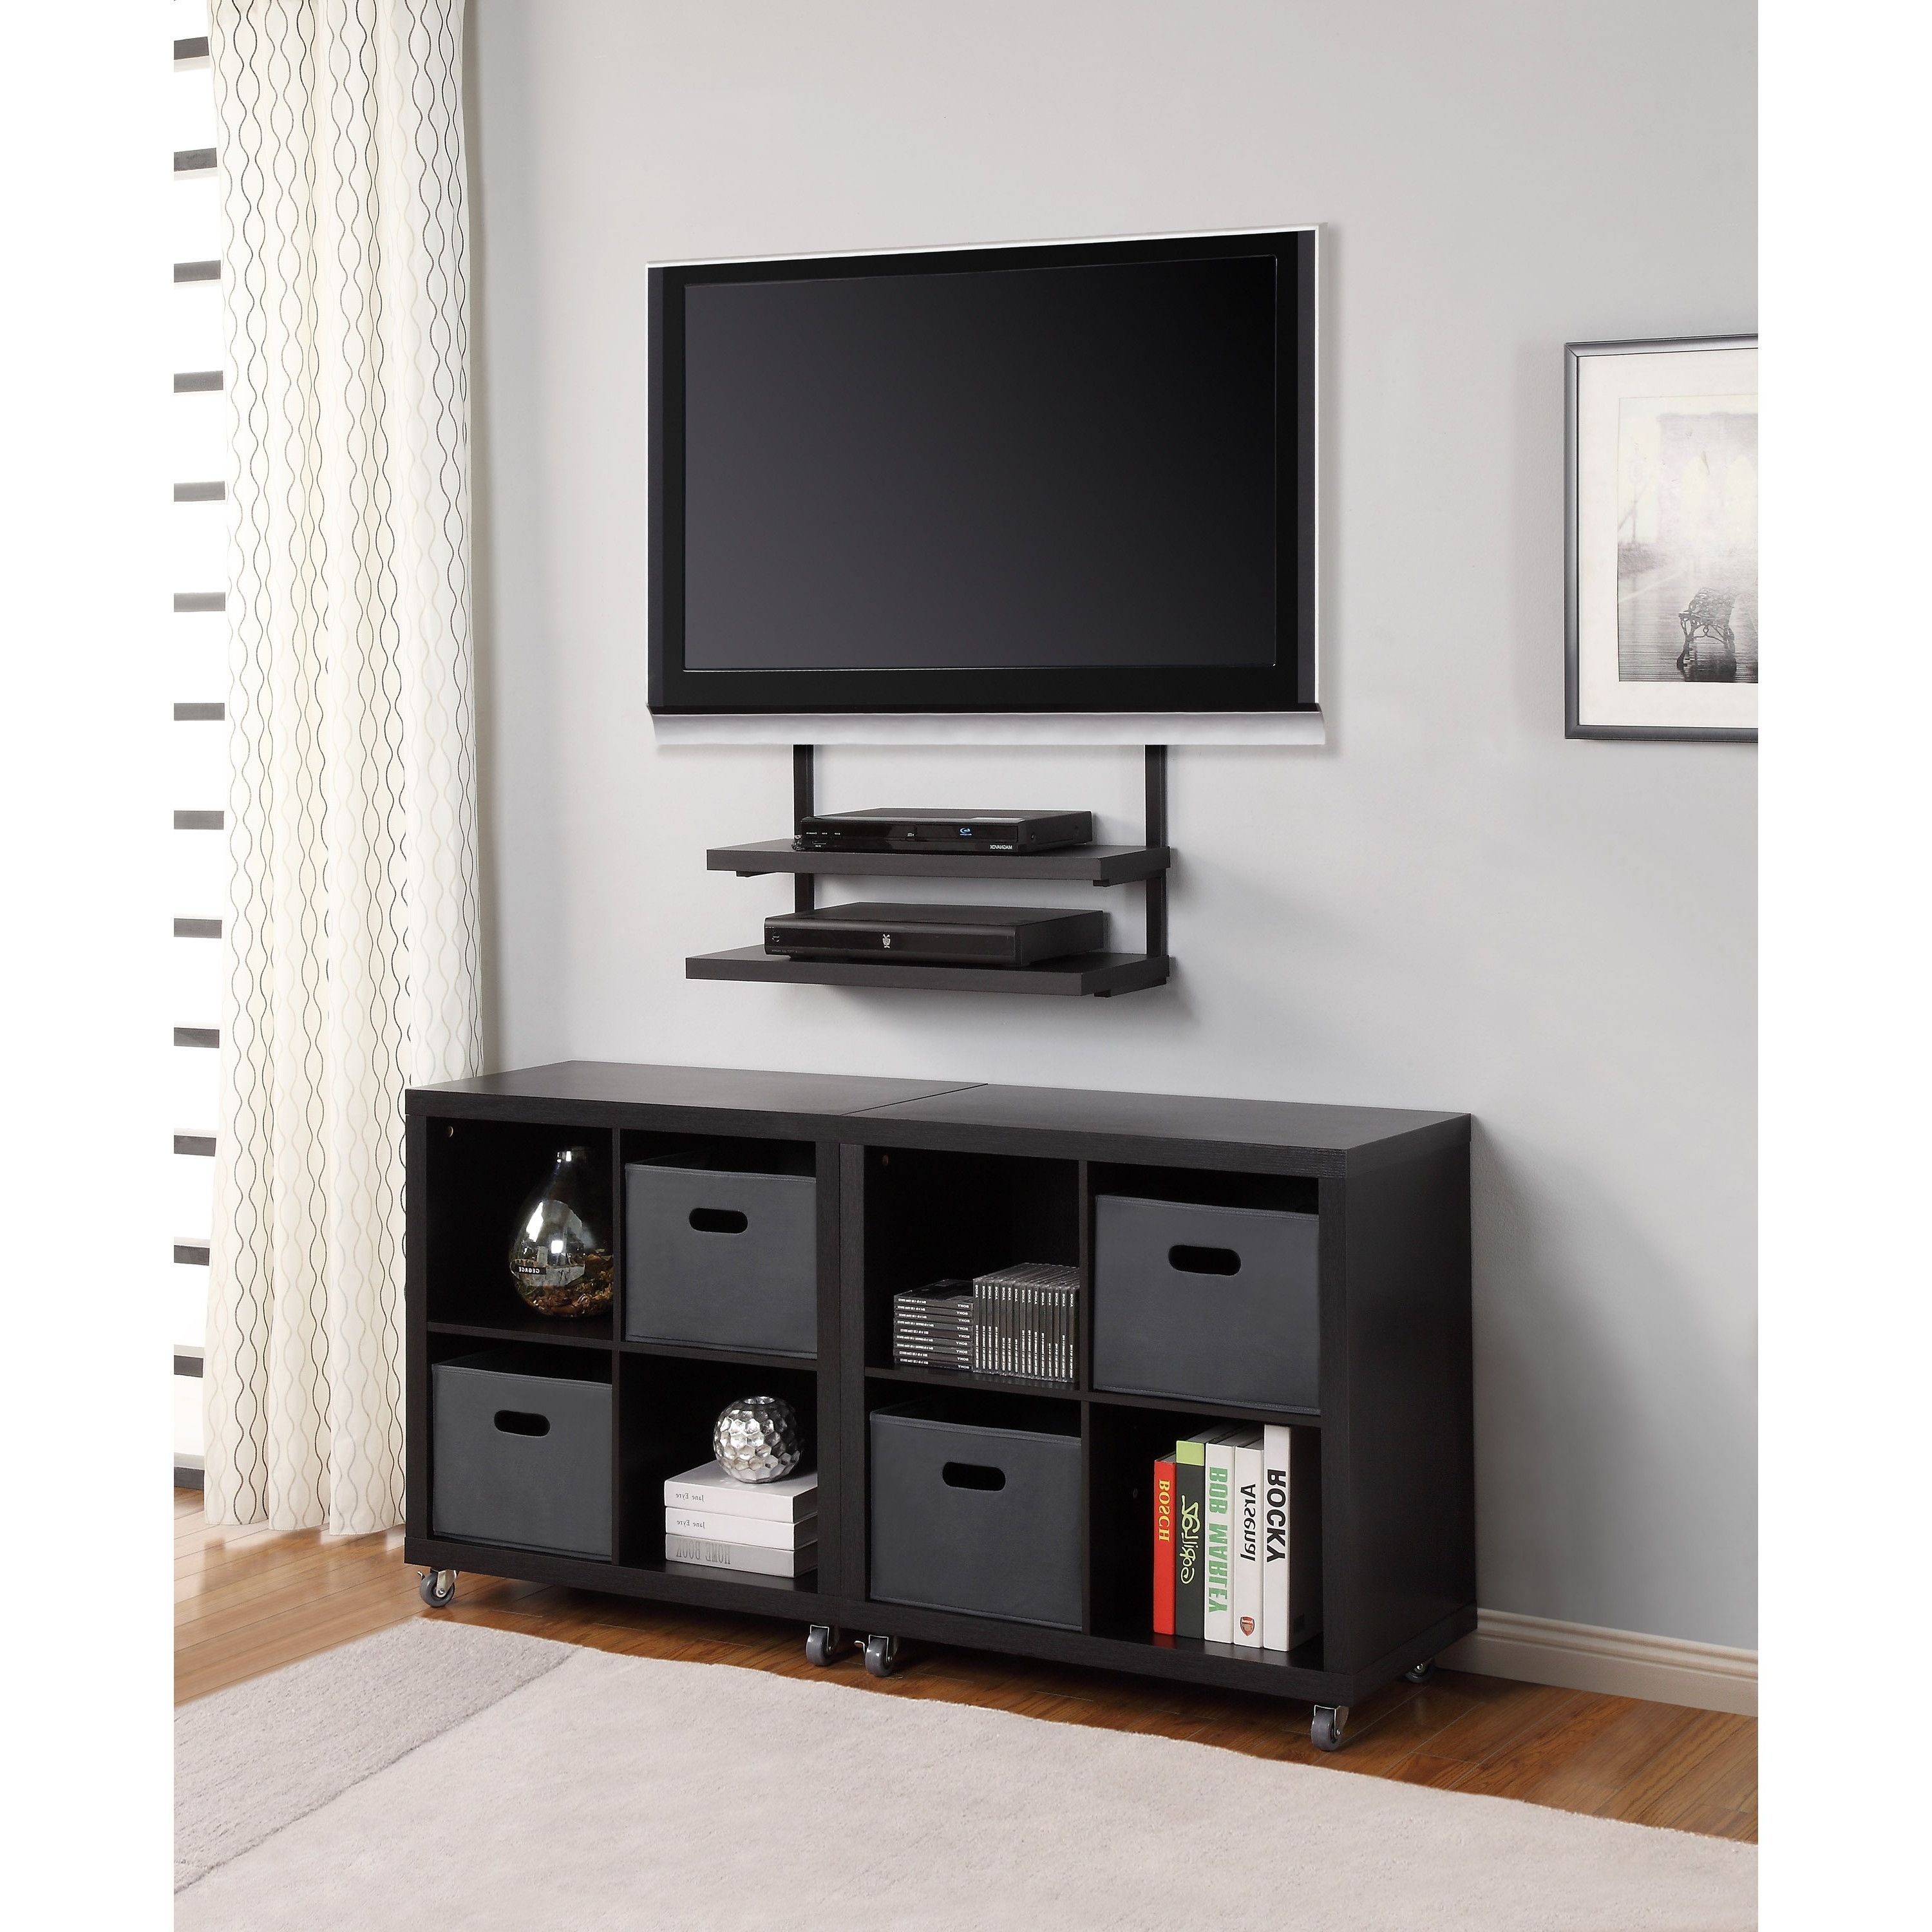 Simple Wall Tv Stand Cabinet Mounted Design Units Mount – Buyouapp Regarding Recent Wall Mounted Tv Cabinets For Flat Screens (Photo 10 of 20)